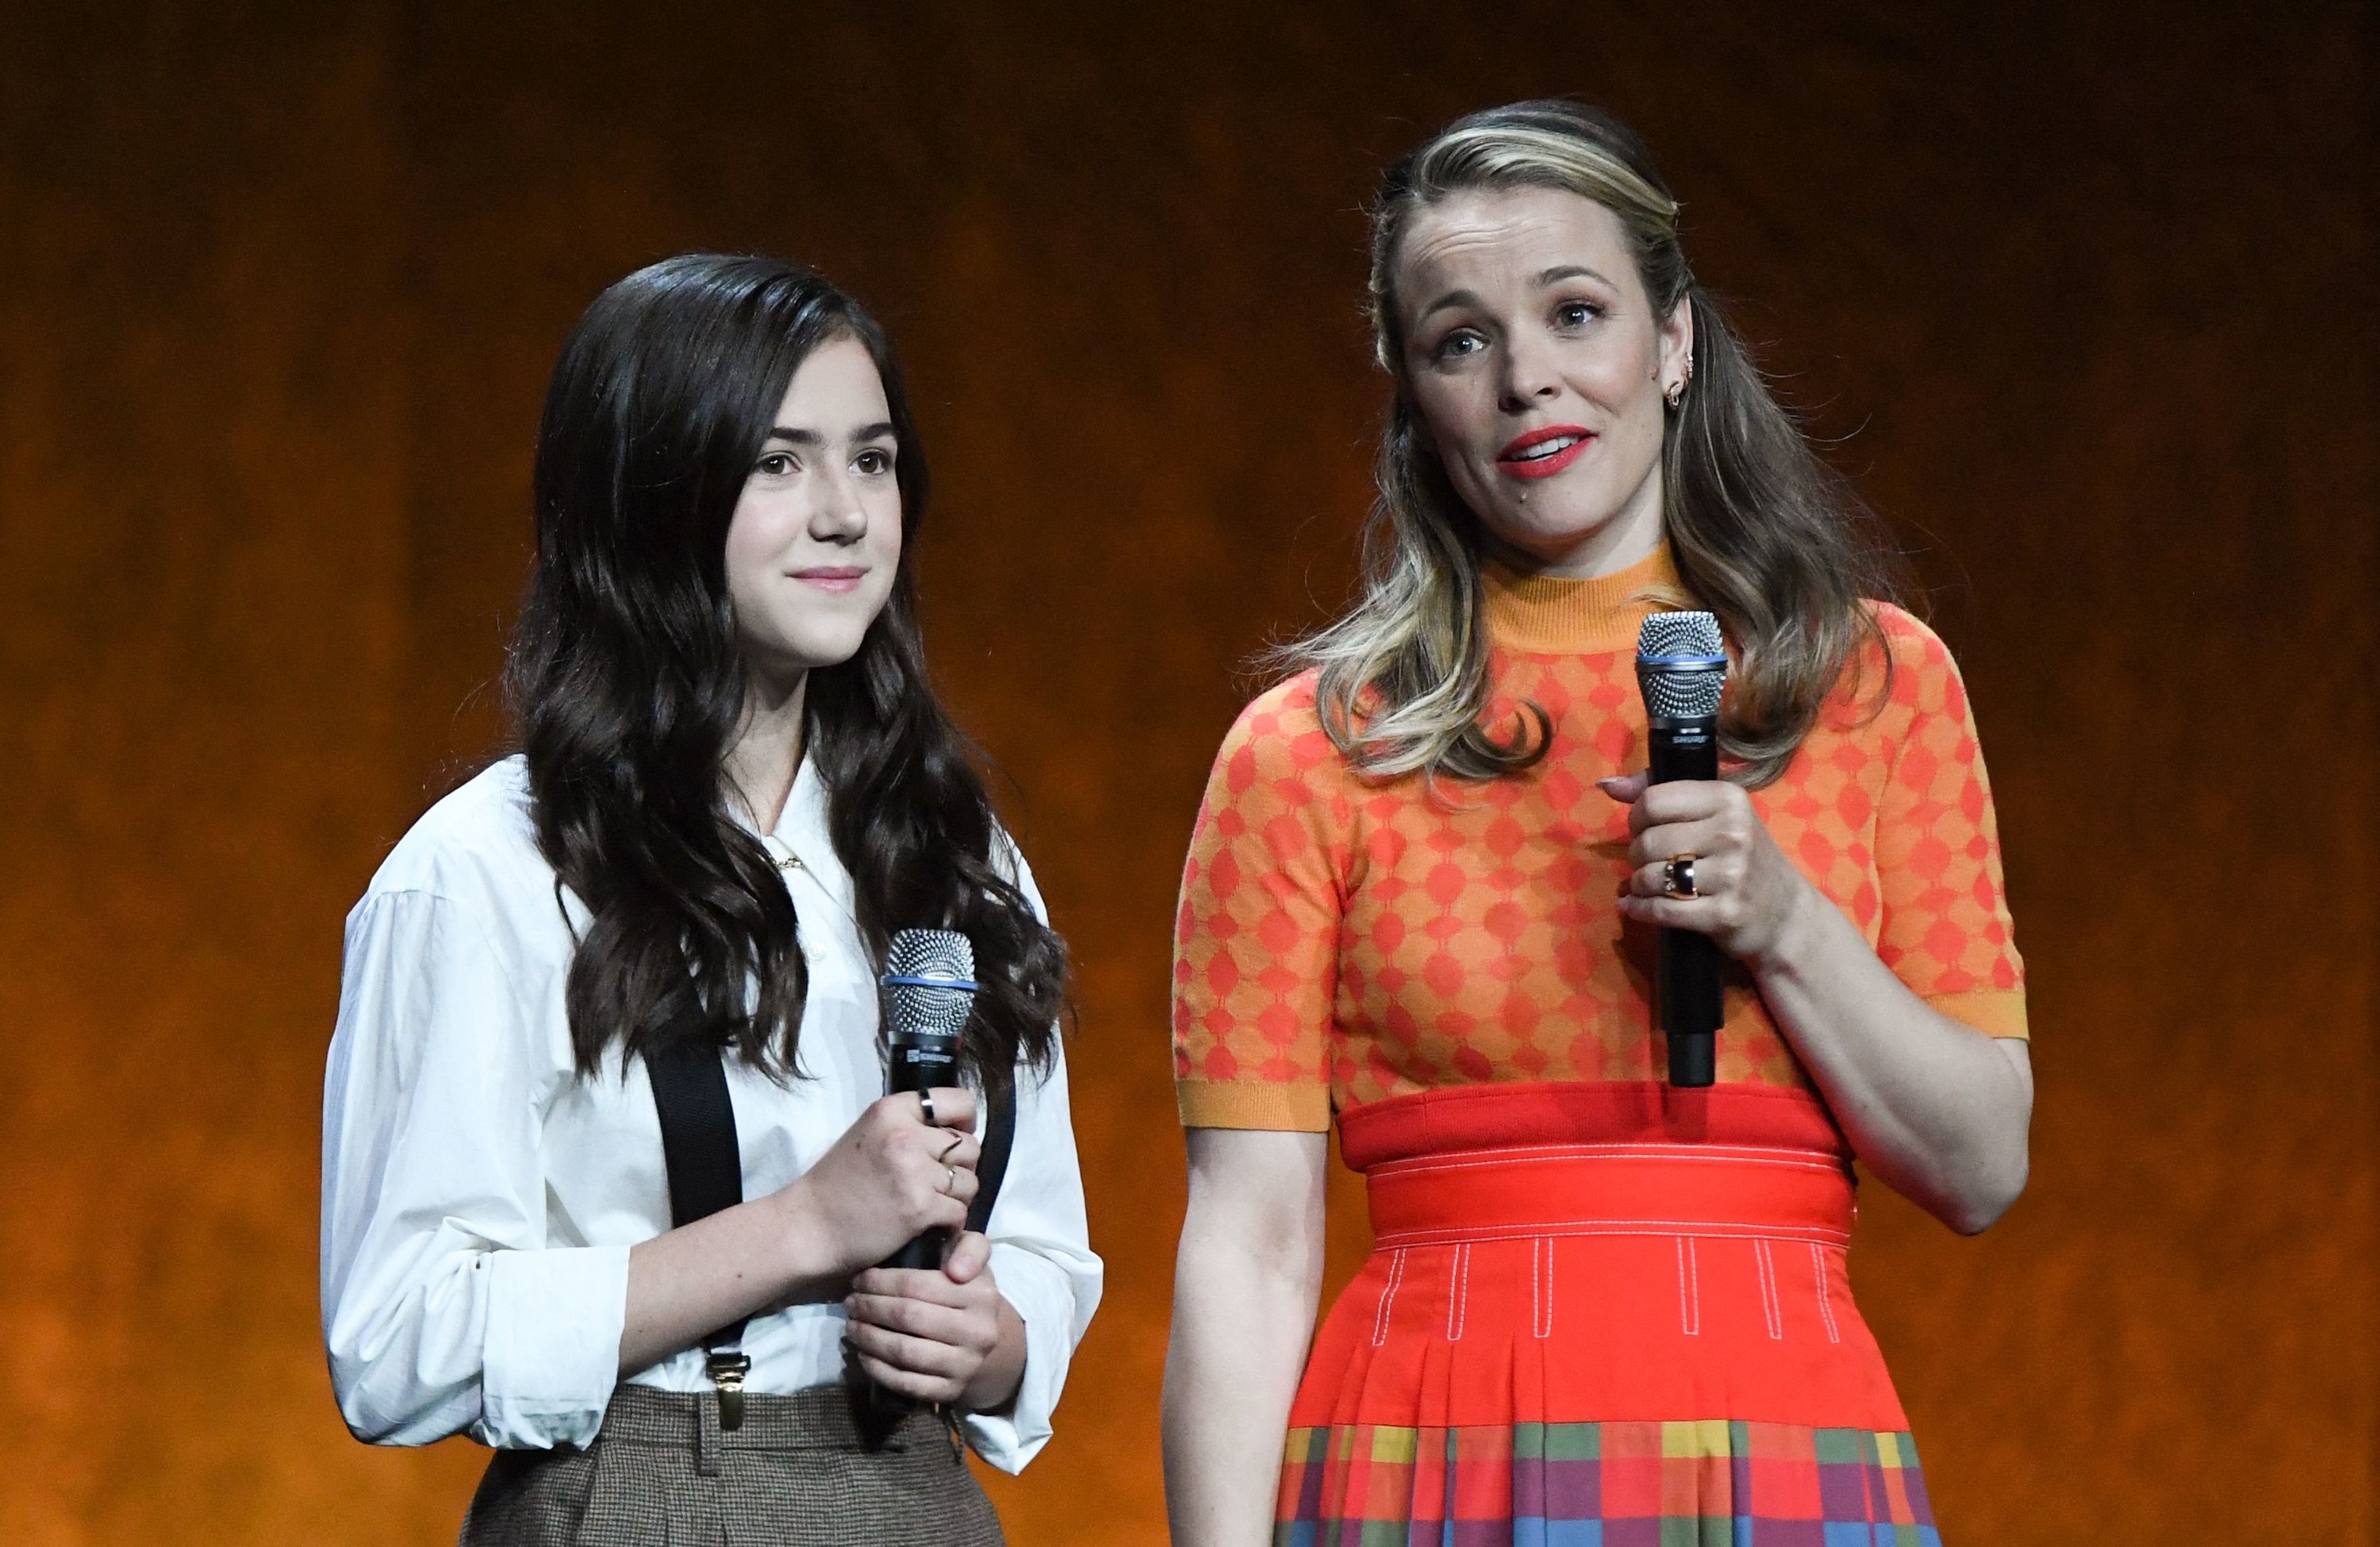 Rachel McAdams and Abby Ryder Fortson present &quot;Are You There God? It&#x27;s Me Margaret&quot; during the Lionsgate presentation at CinemaCon 2022